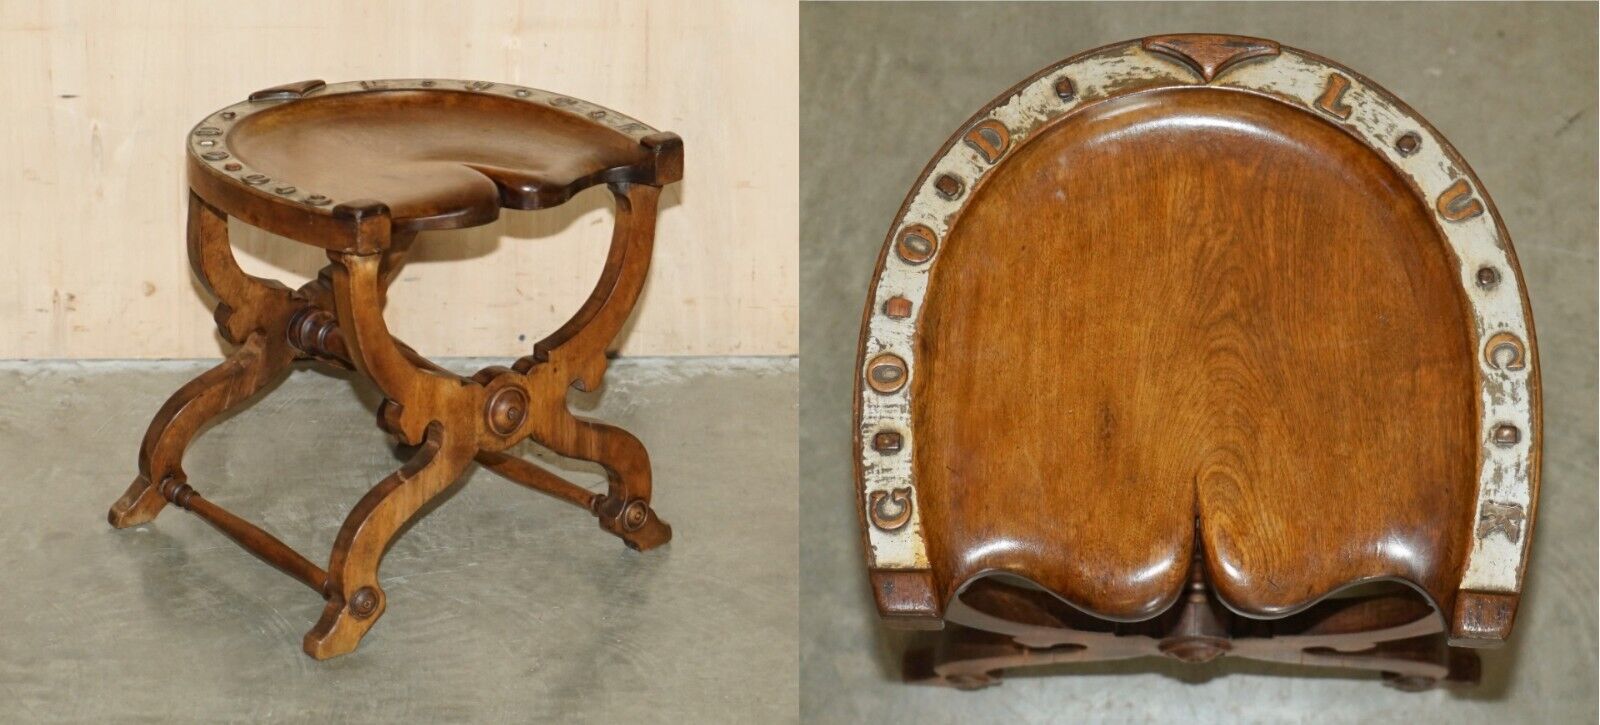 SUBLIME ANTIQUE VICTORIAN HAND CARVED ENGLISH OAK "GOOD LUCK" HORSE SHOE STOOL